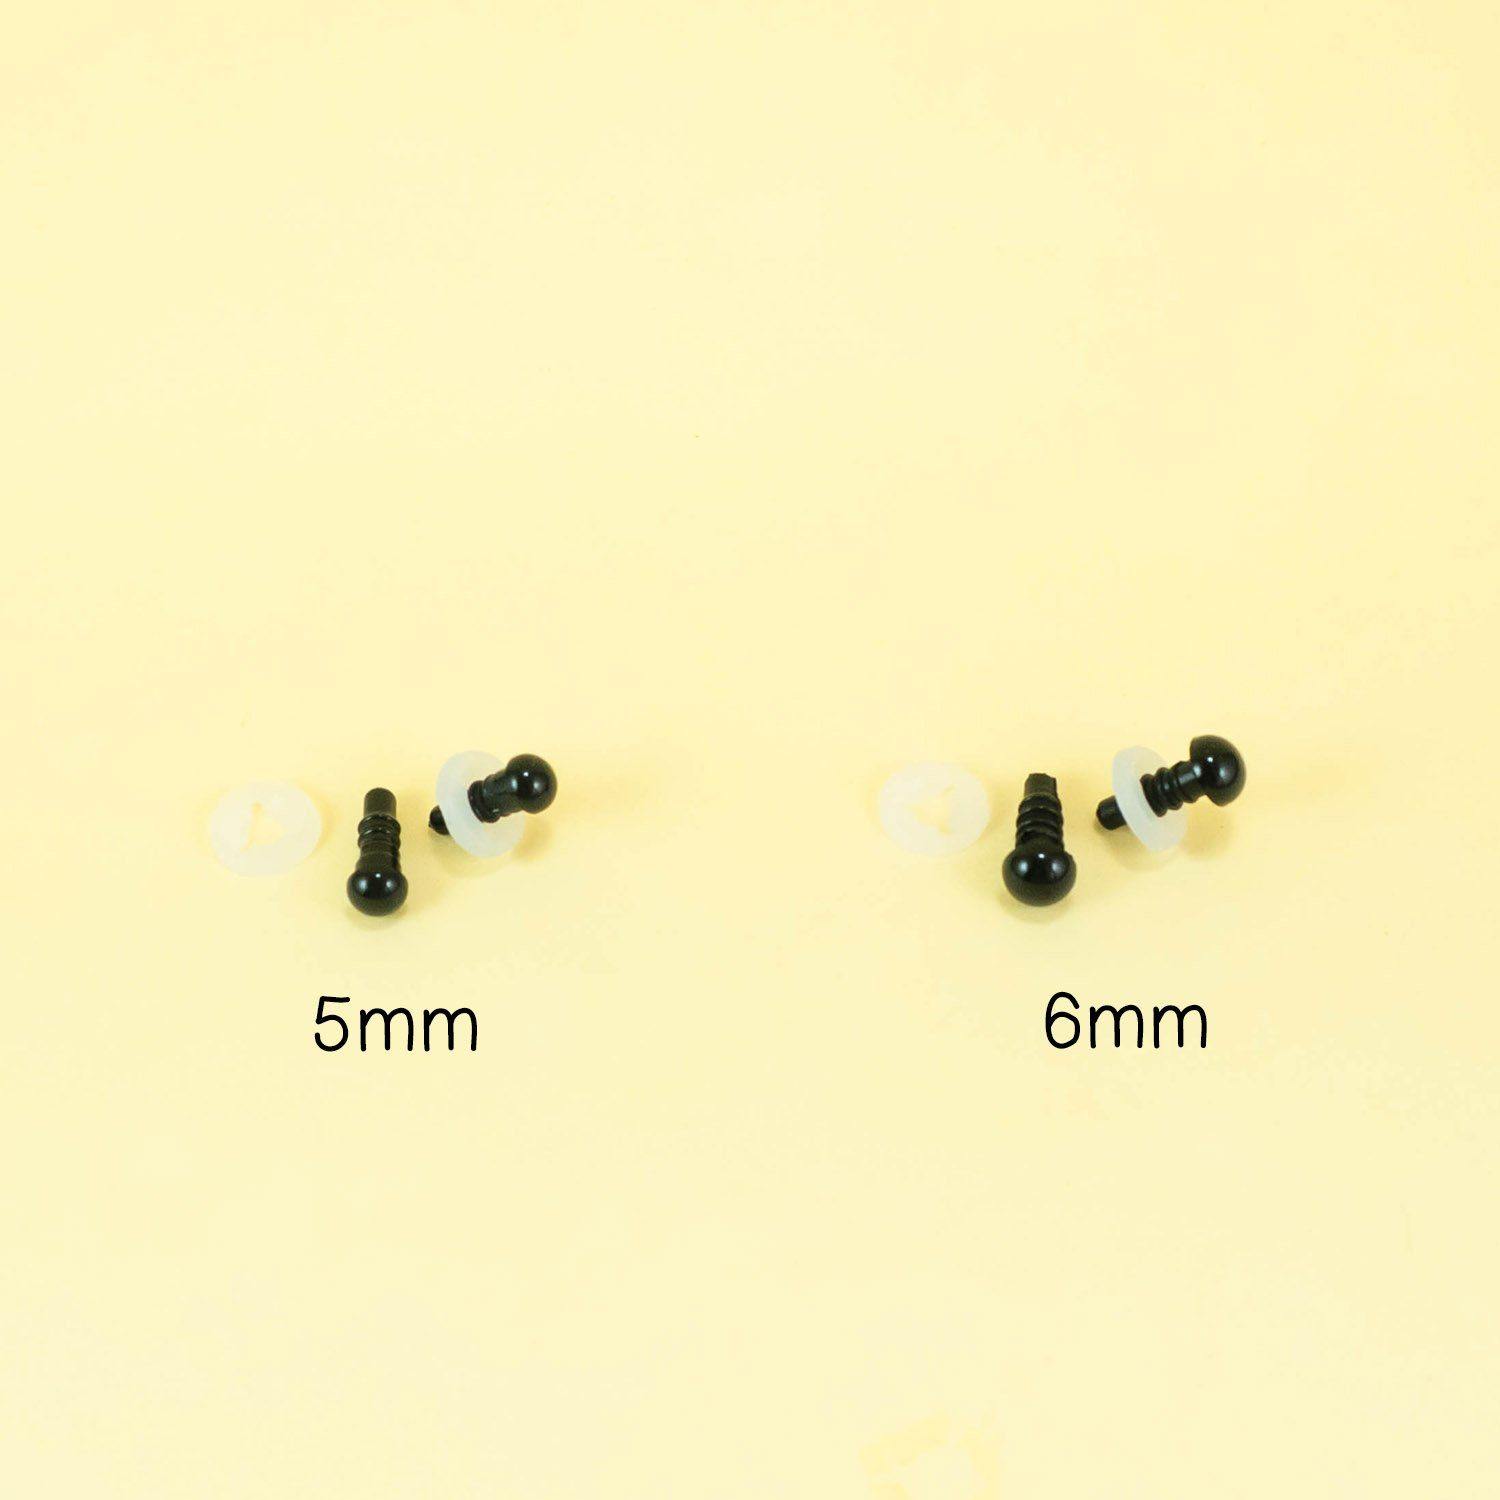 5mm and 6mm safety eyes for crochet toys, plush and stuffed animals